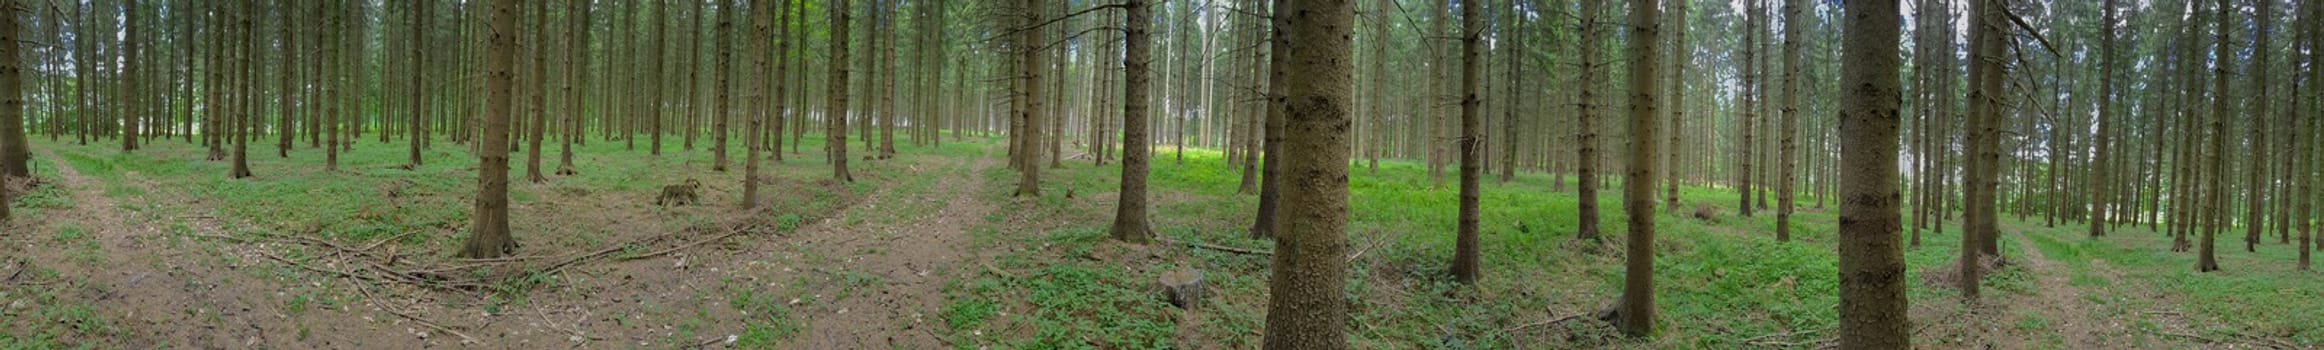 Germany: Panorama Of Pine Forest In Lower Saxony